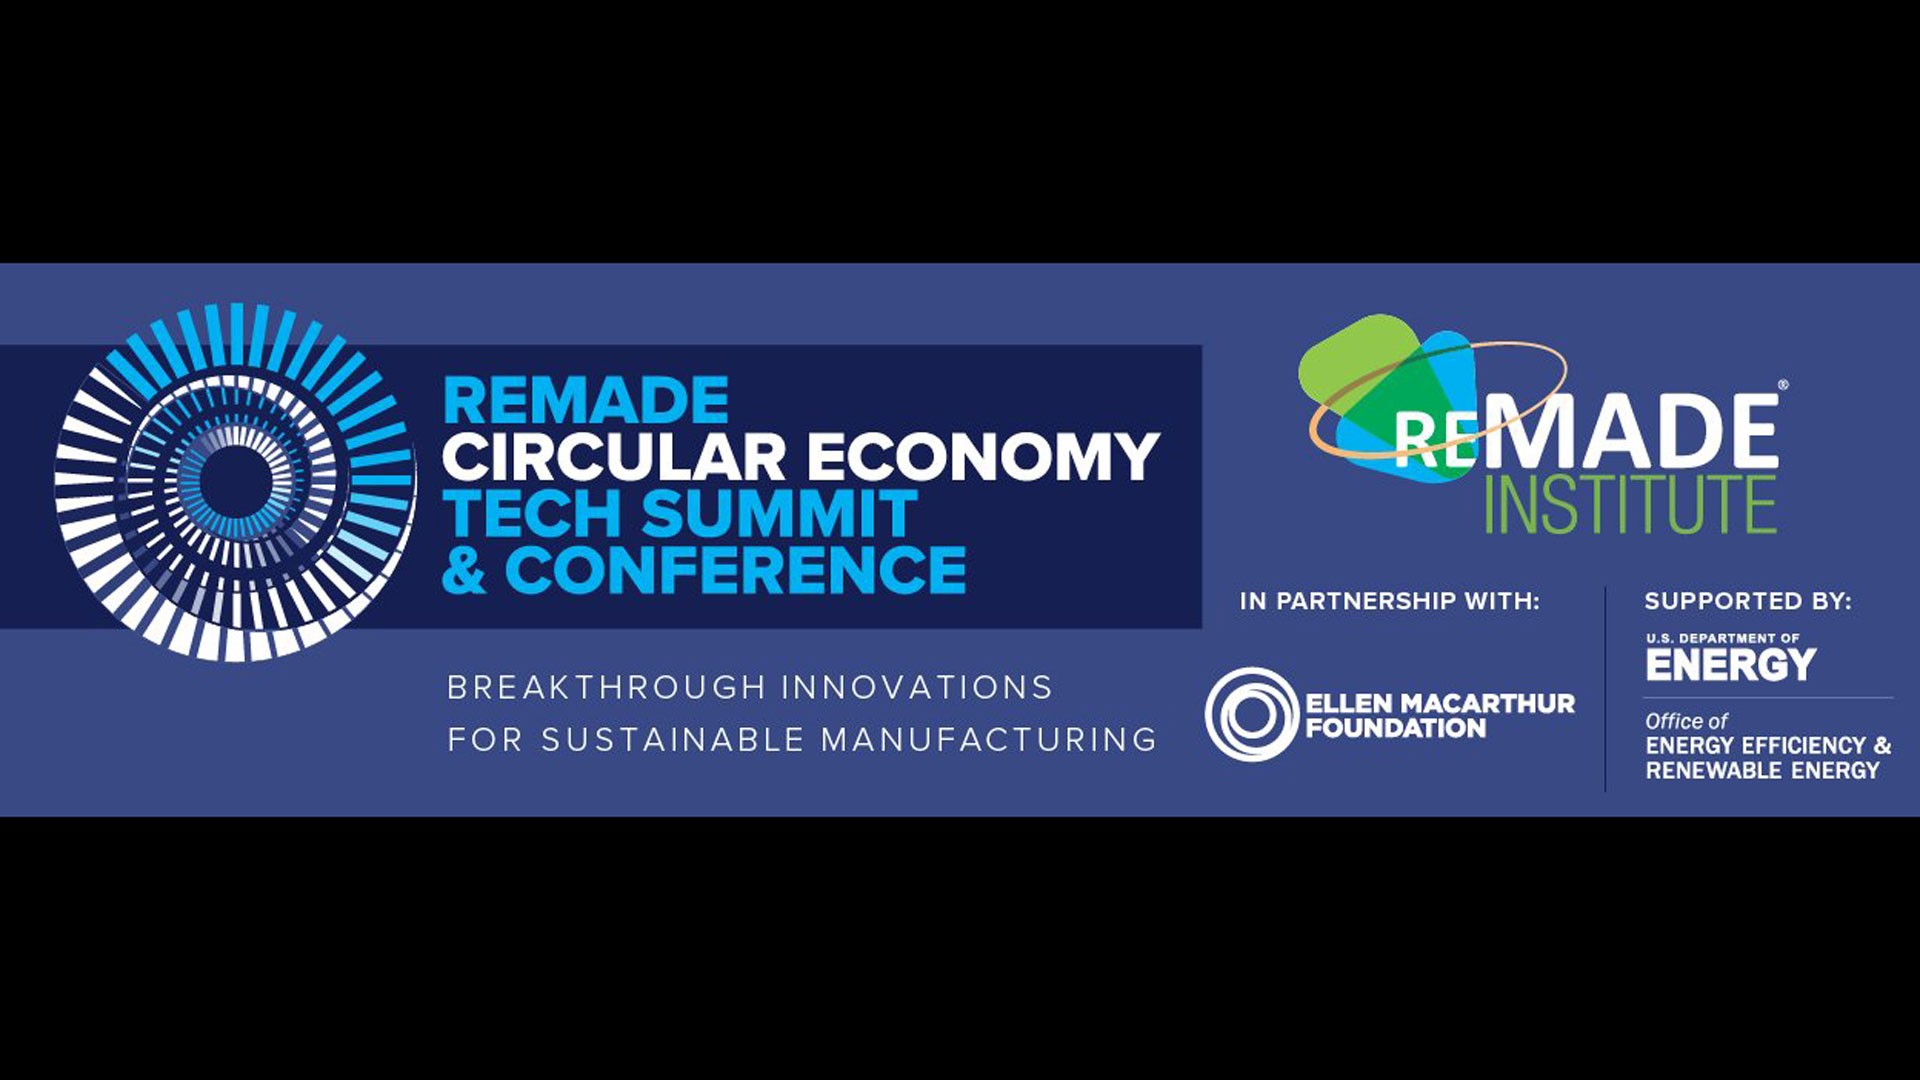 REMADE Circular Economy Technology Summit & Conference